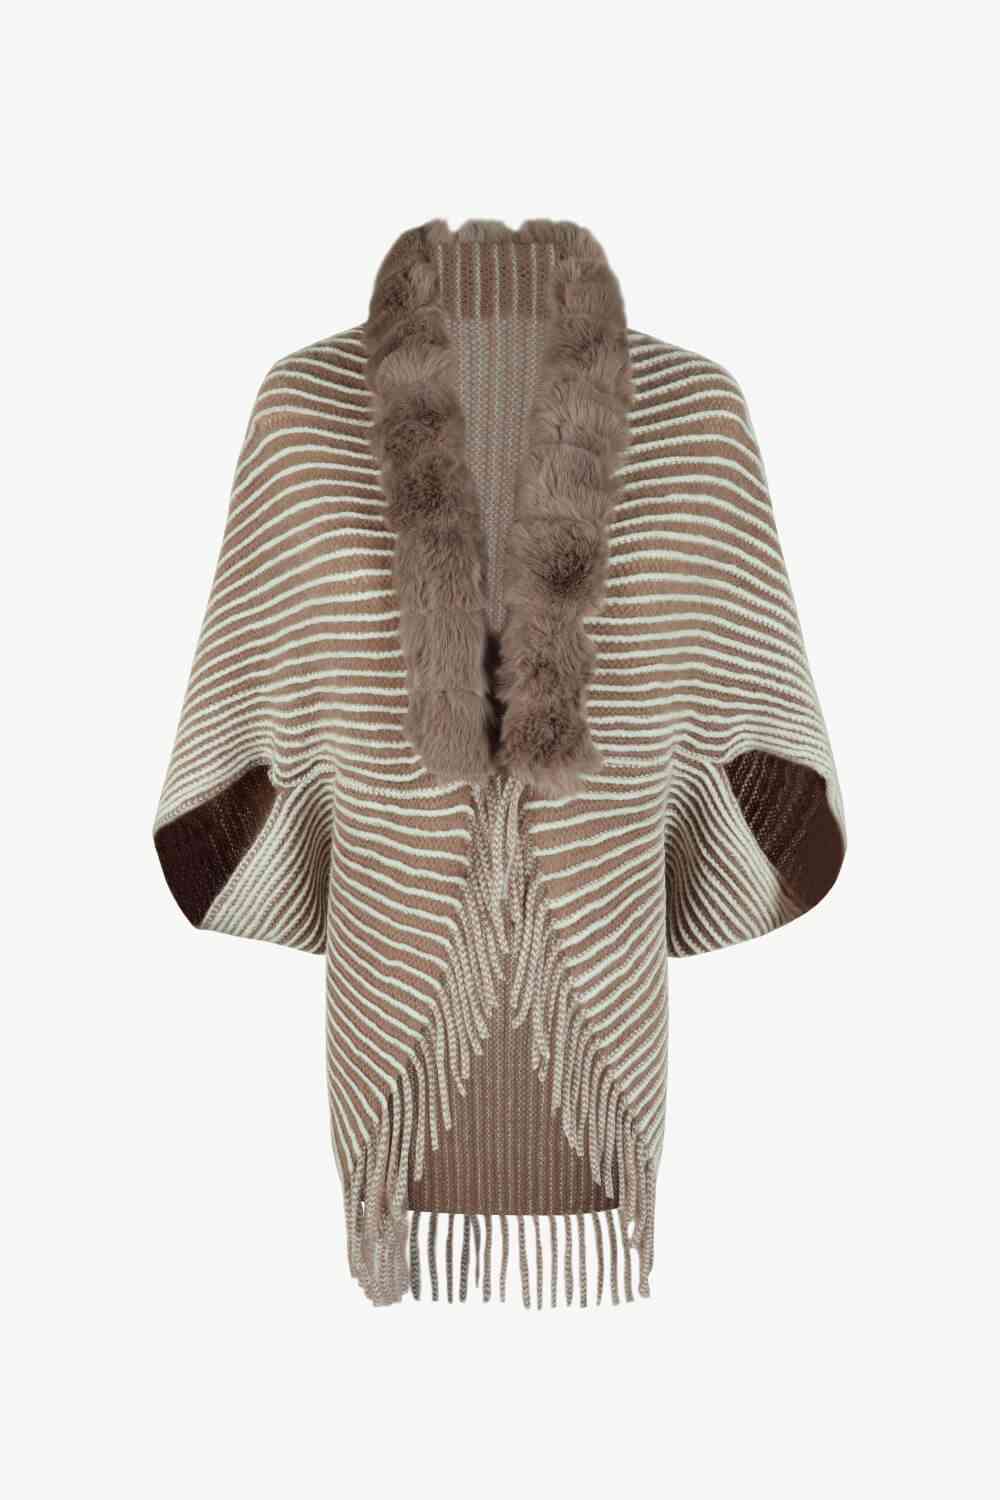 Striped Open Front Fringe Poncho Taupe One Size